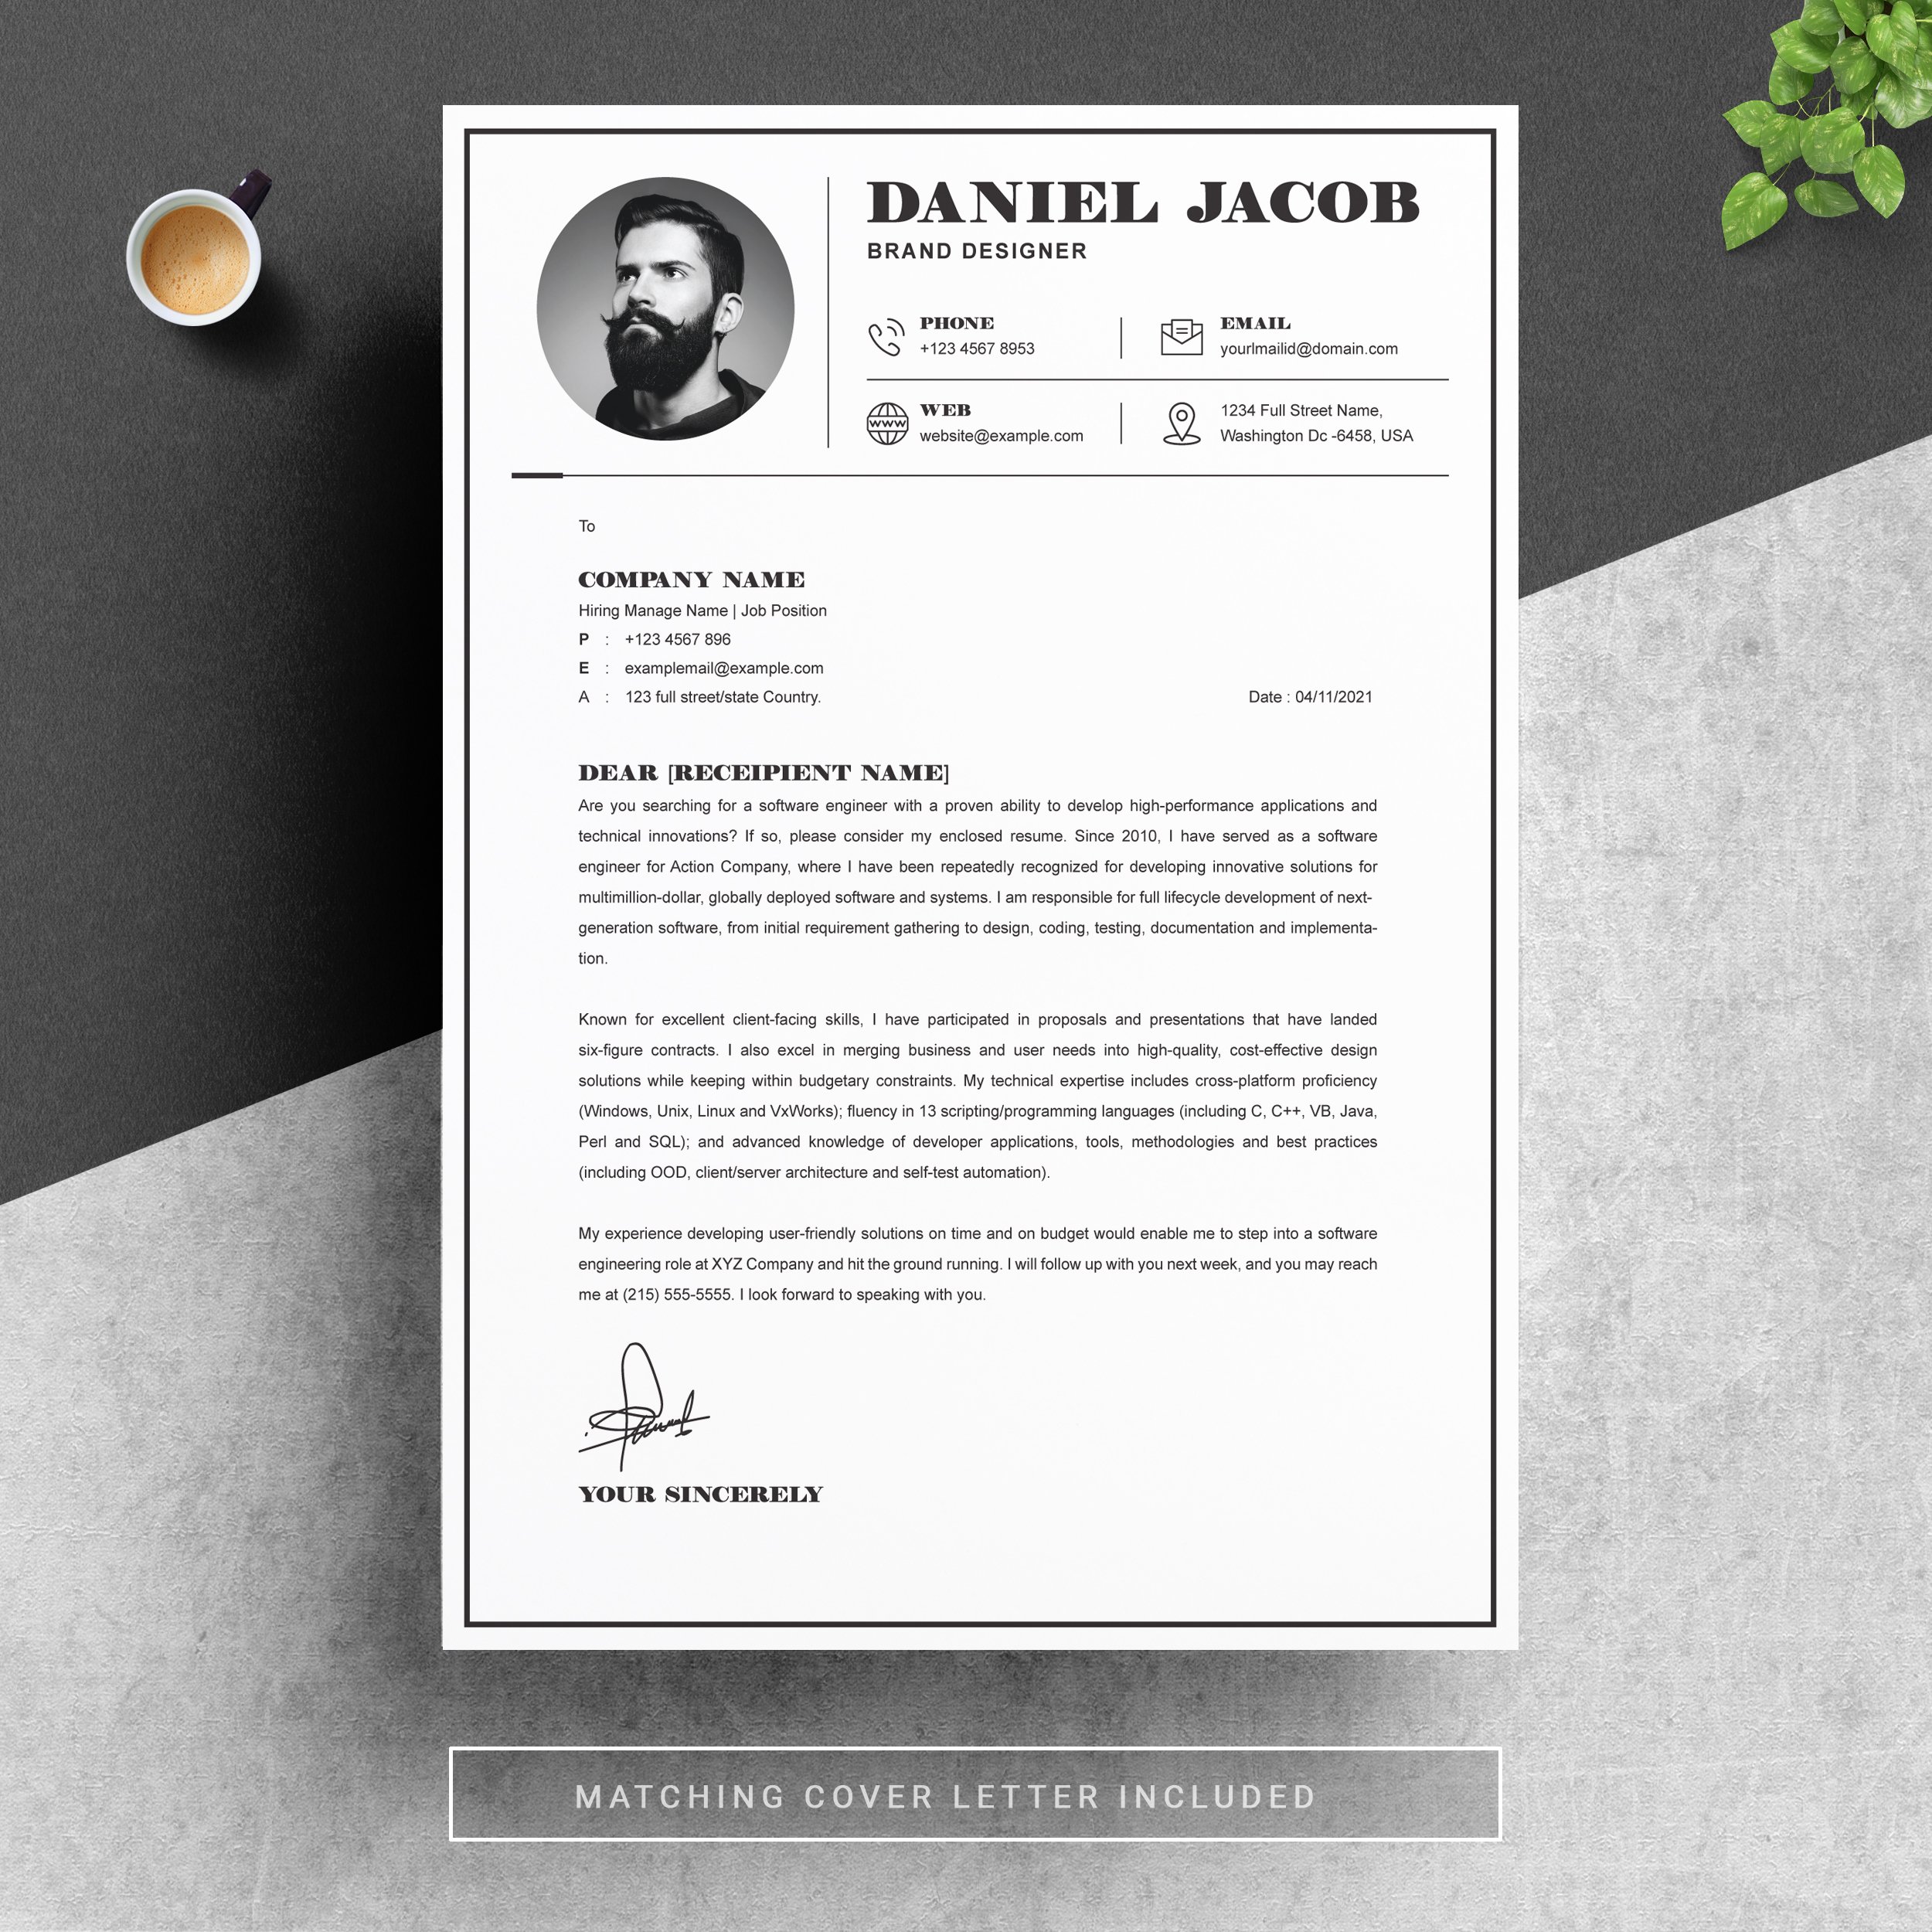 04 resume cover letter page free resume design template 391